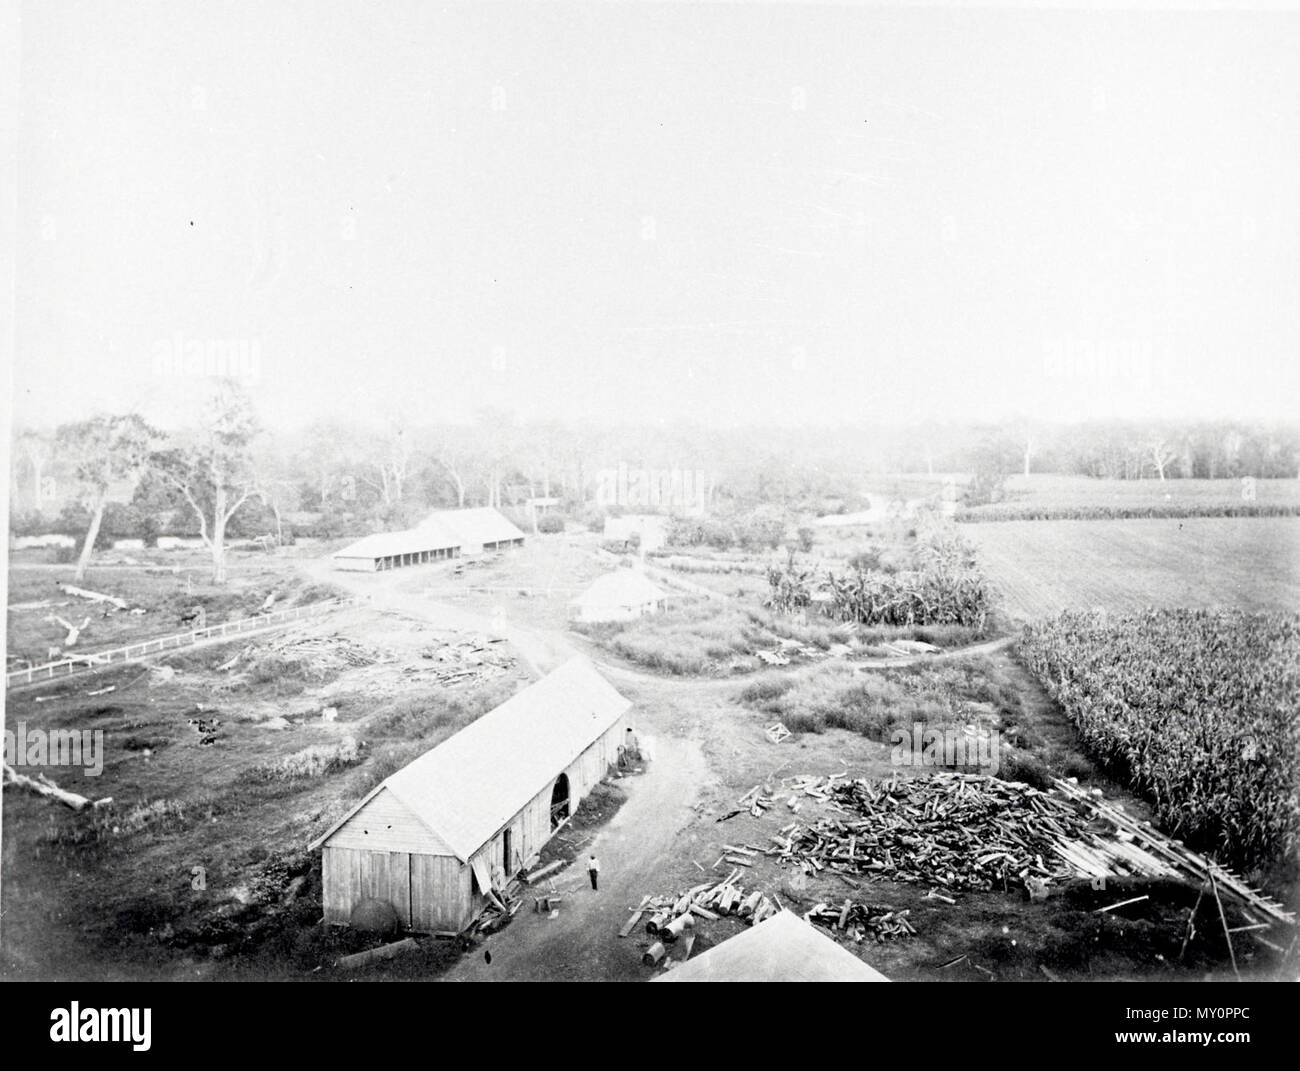 Raff's Sugar Plantation, Morayfield, 1874. The Queenslander 18 September 1869  HIS EXCELLENCY THE EARL OF BELMORE. 20325754 )   The general topic of conversation early in the week was the expected arrival of His Excellency the Earl of Belmore, Governor of the parent colony. So much had been beard of the many excellent qualities of His Excellency, both in his important position as Governor of New South Wales, and as a private gentleman, that many persons were desirous of welcoming him to our colony.   Notwithstanding the unpropitious weather, His Excellency Earl Belmore visited Mr. Raff's sugar Stock Photo